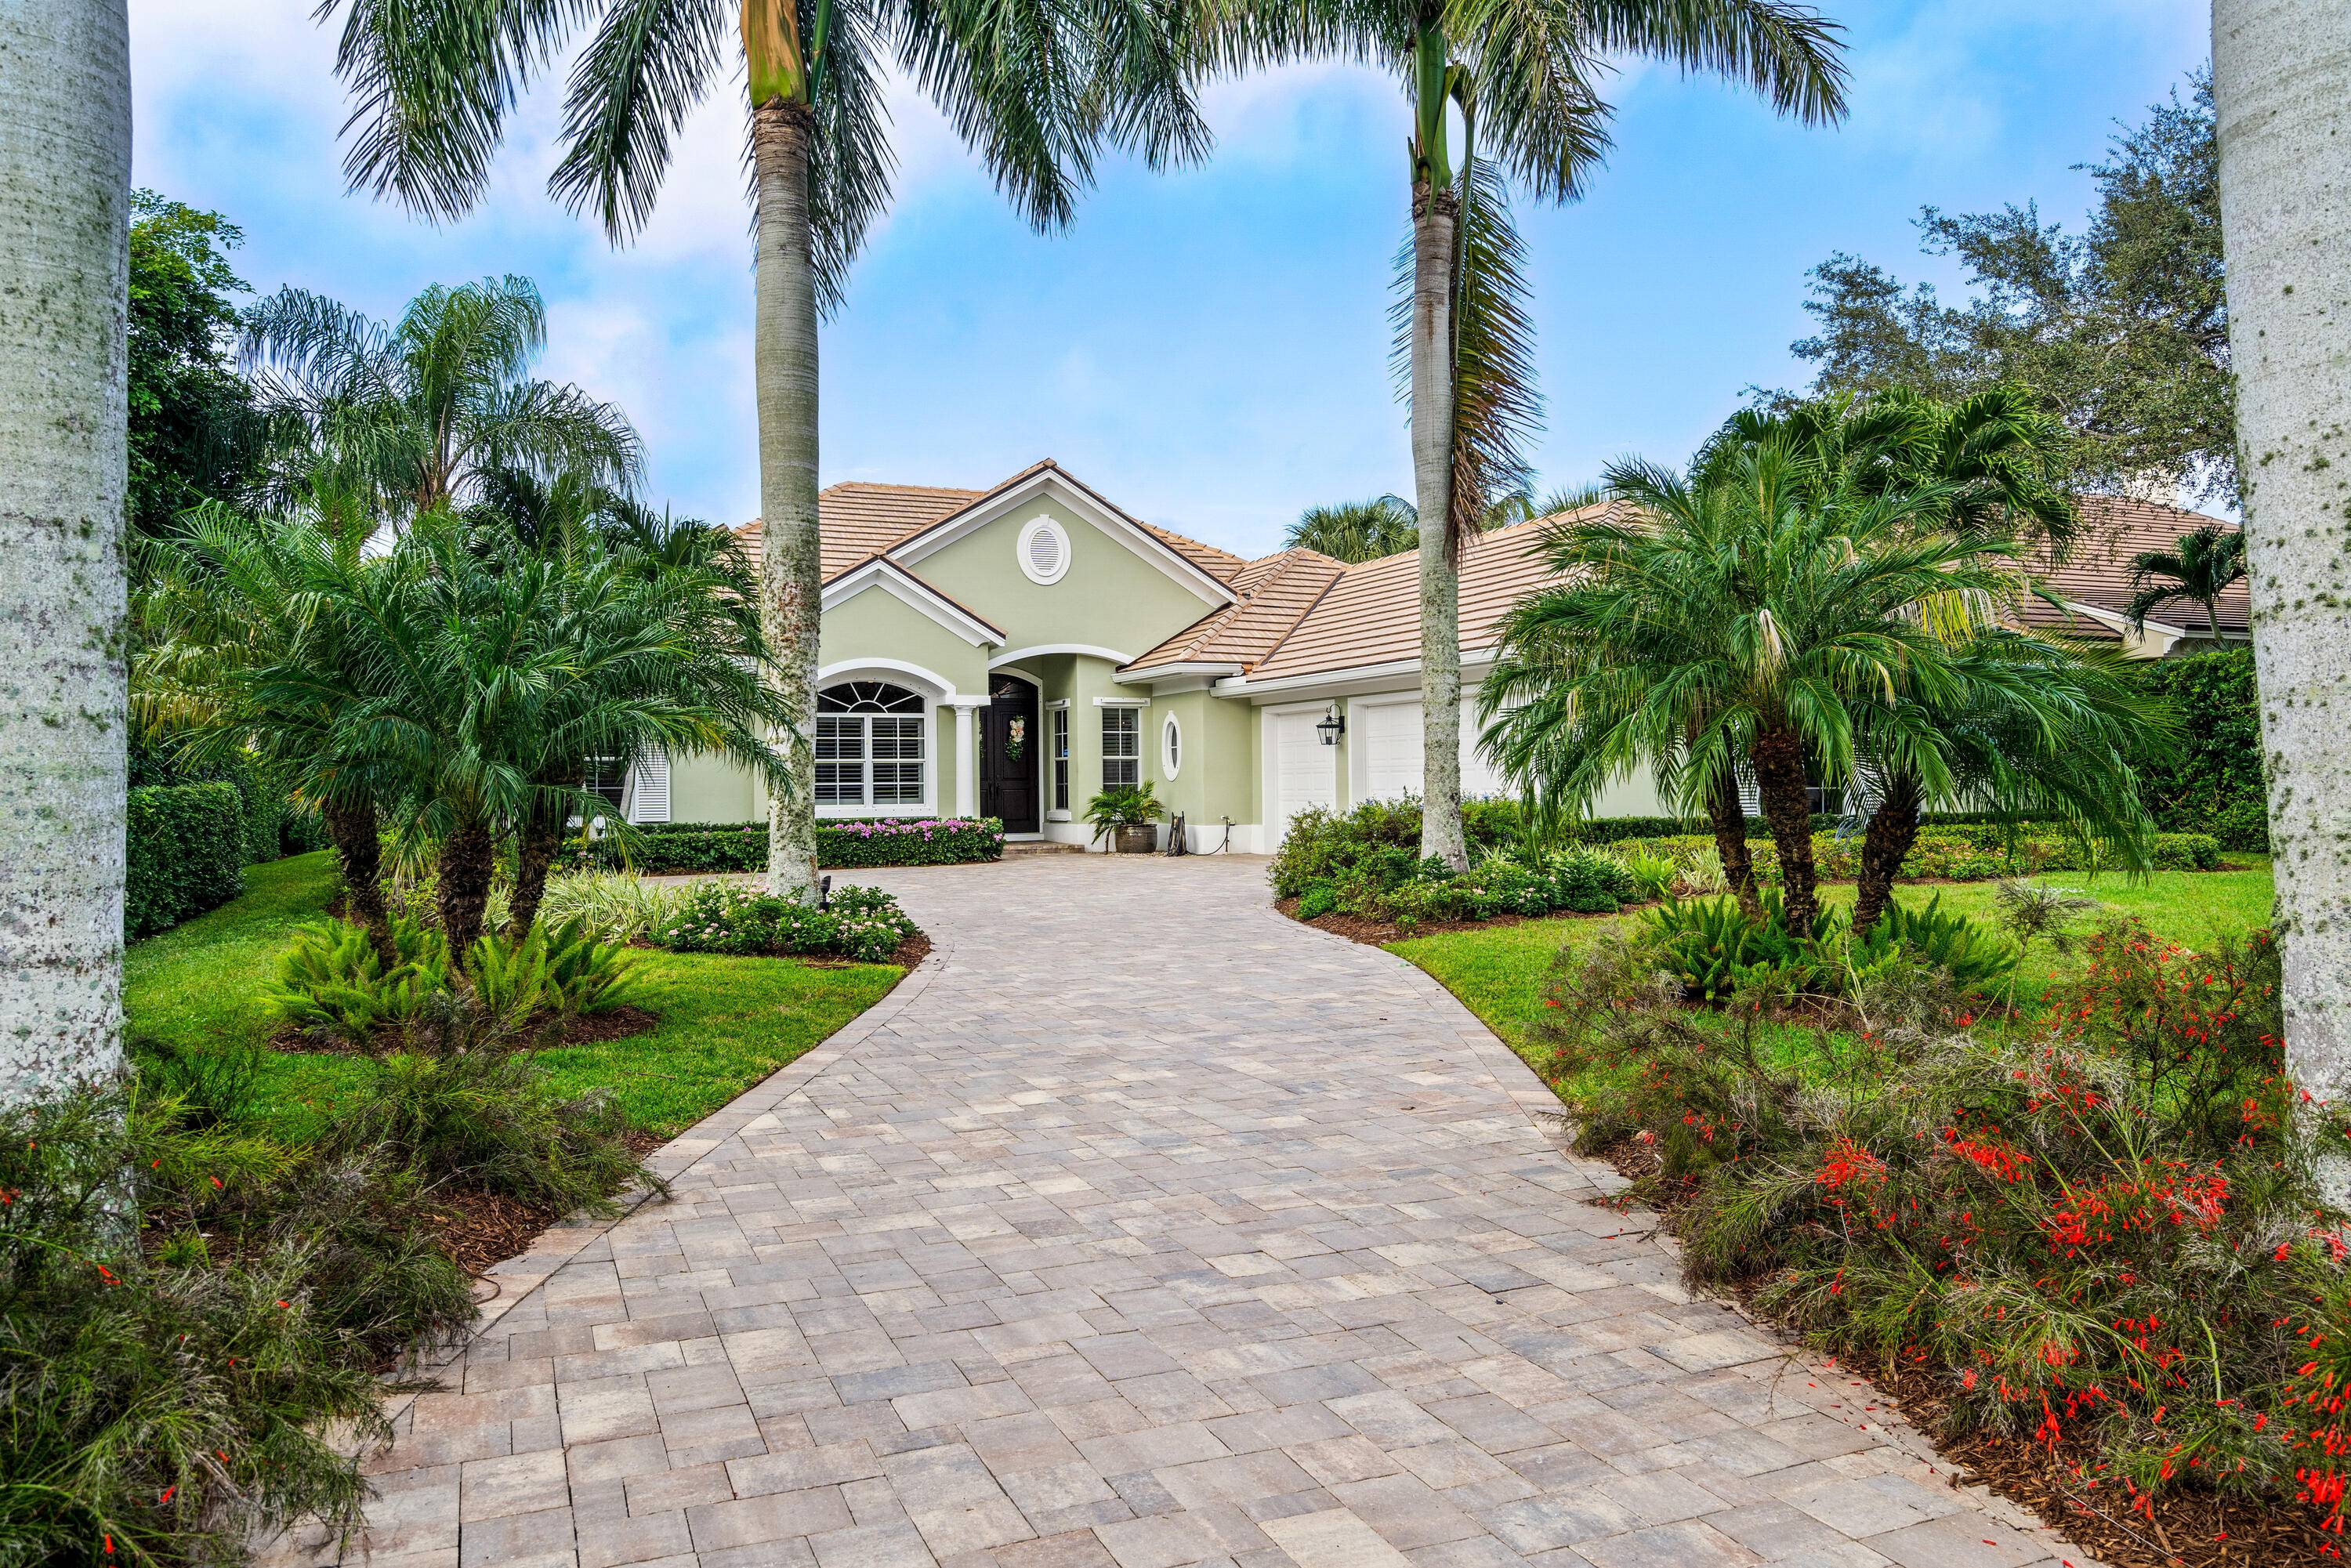 Discover a private paradise in this 3 BR, 3 Bath gem on a lush preserve estate size lot.